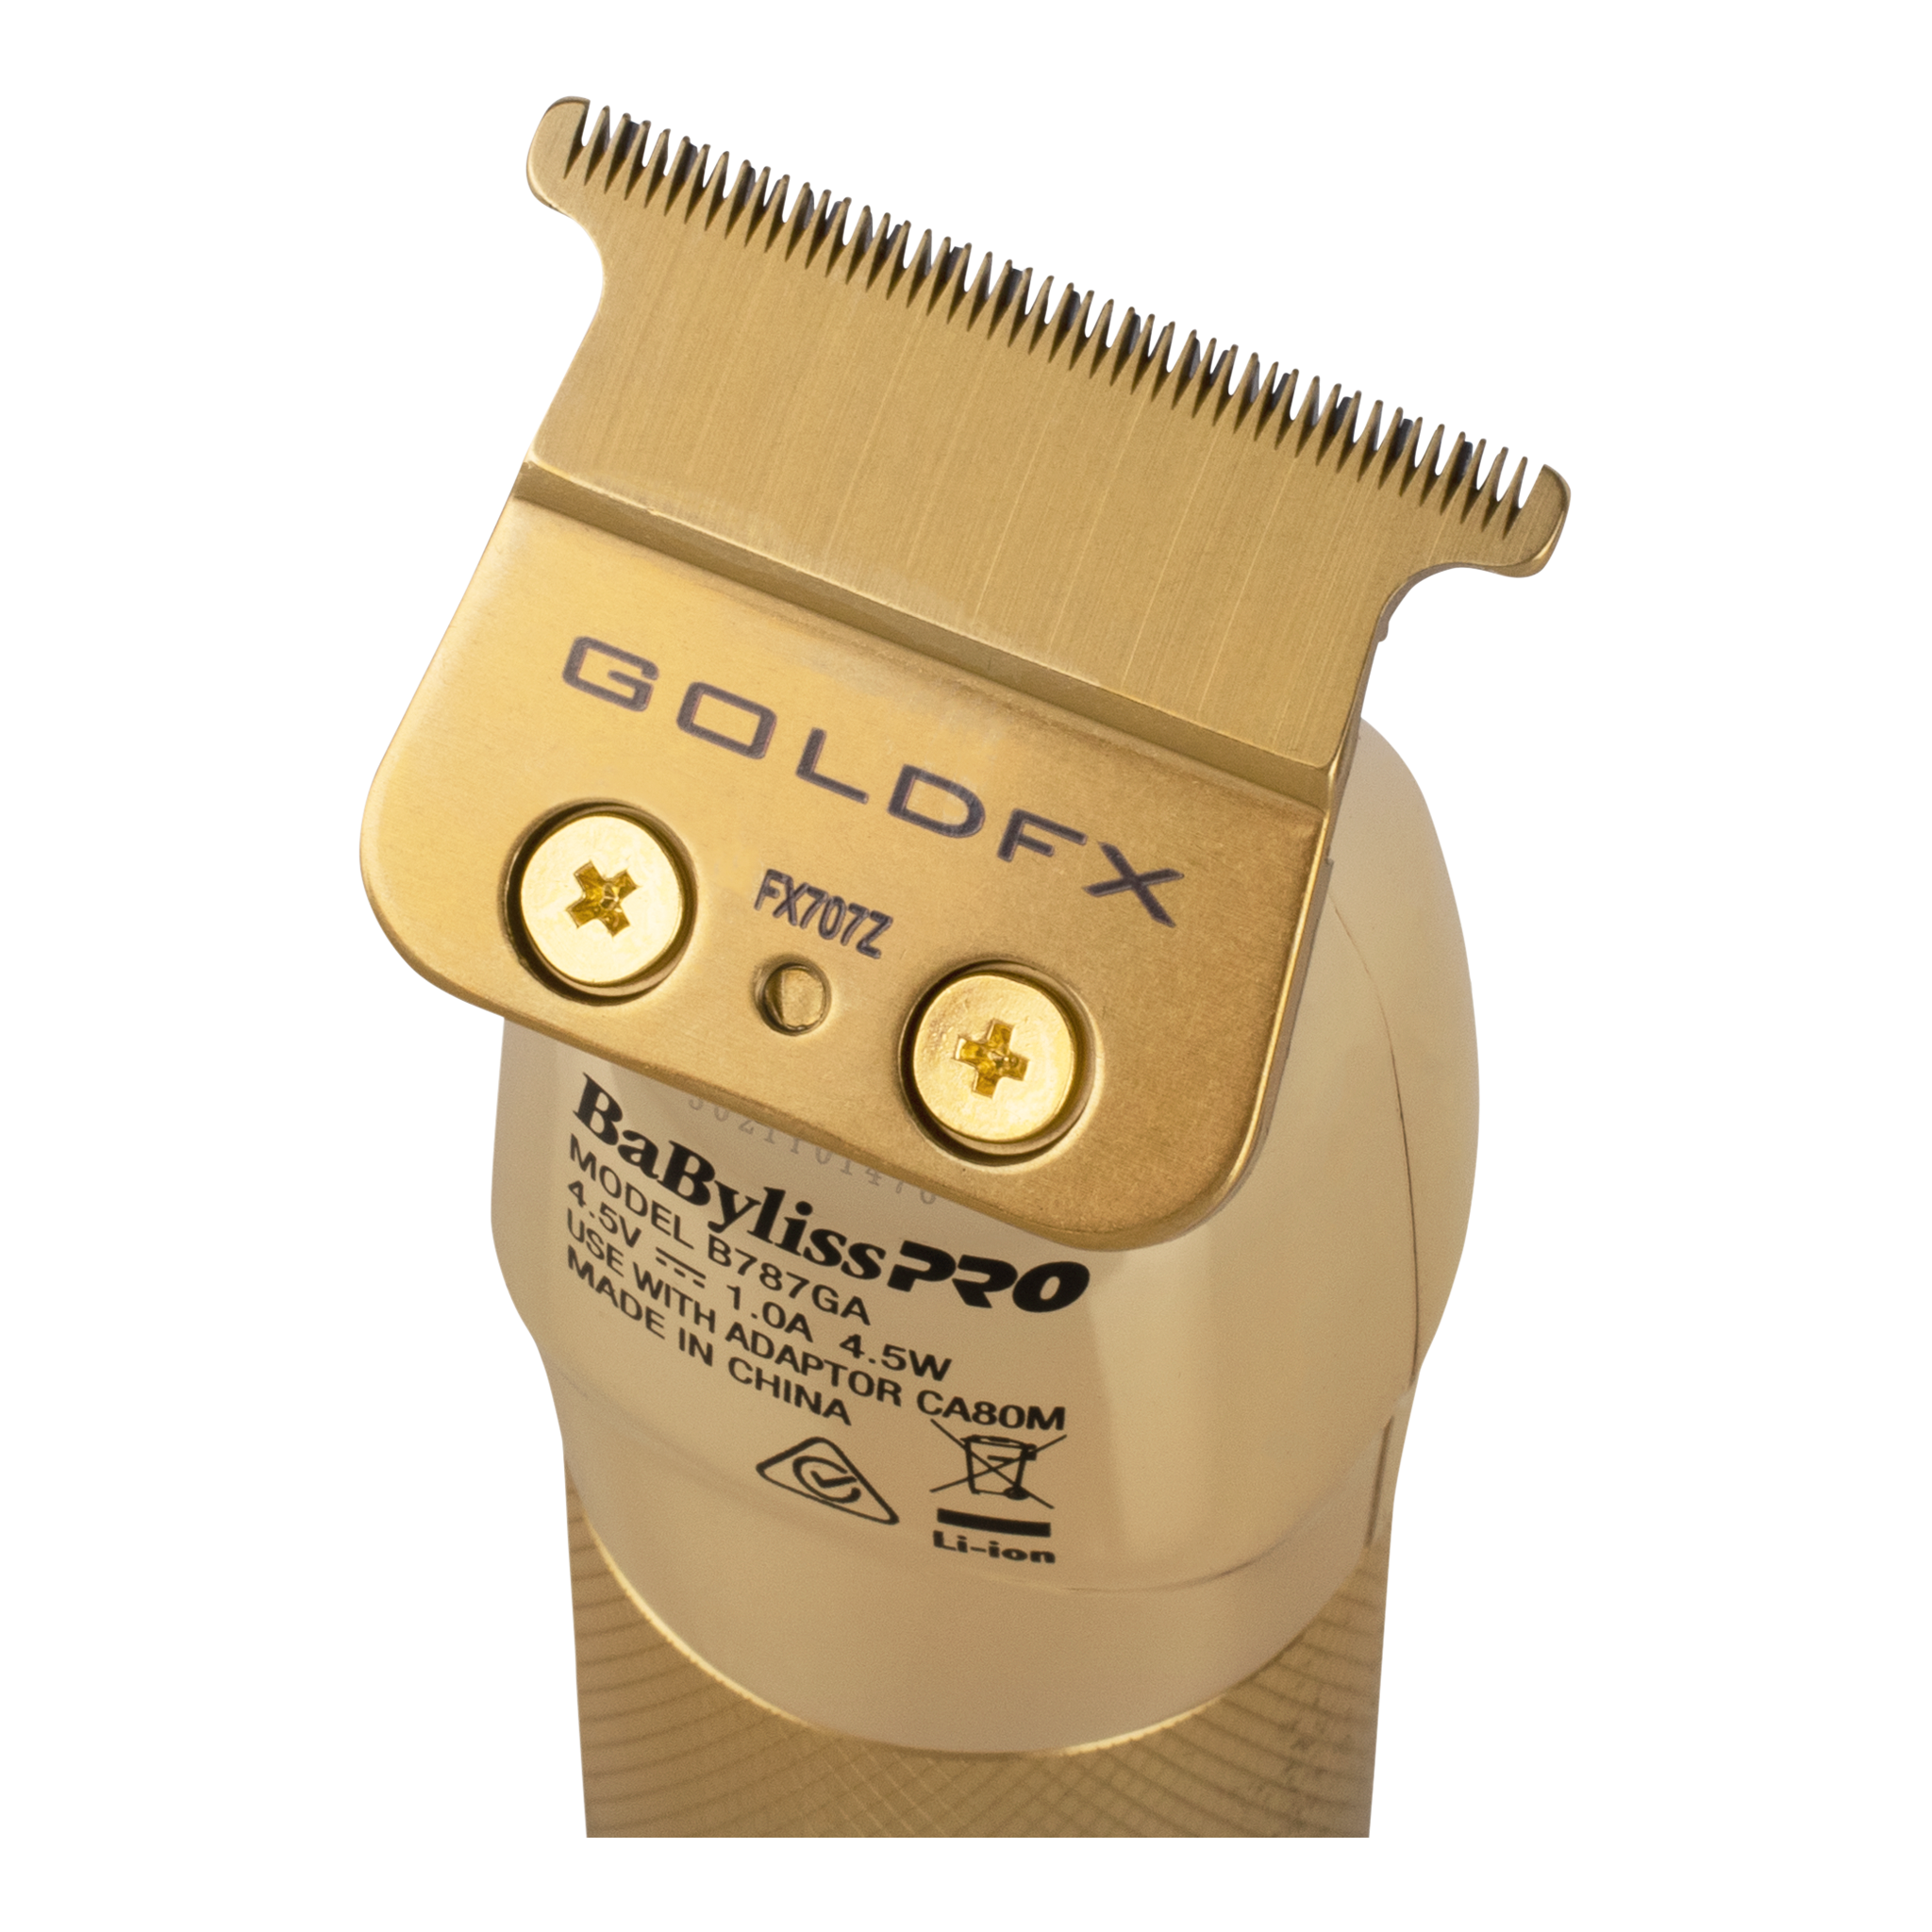 BaBylissPRO Duo Gold Double Foil Shaver and Outliner Trimmer